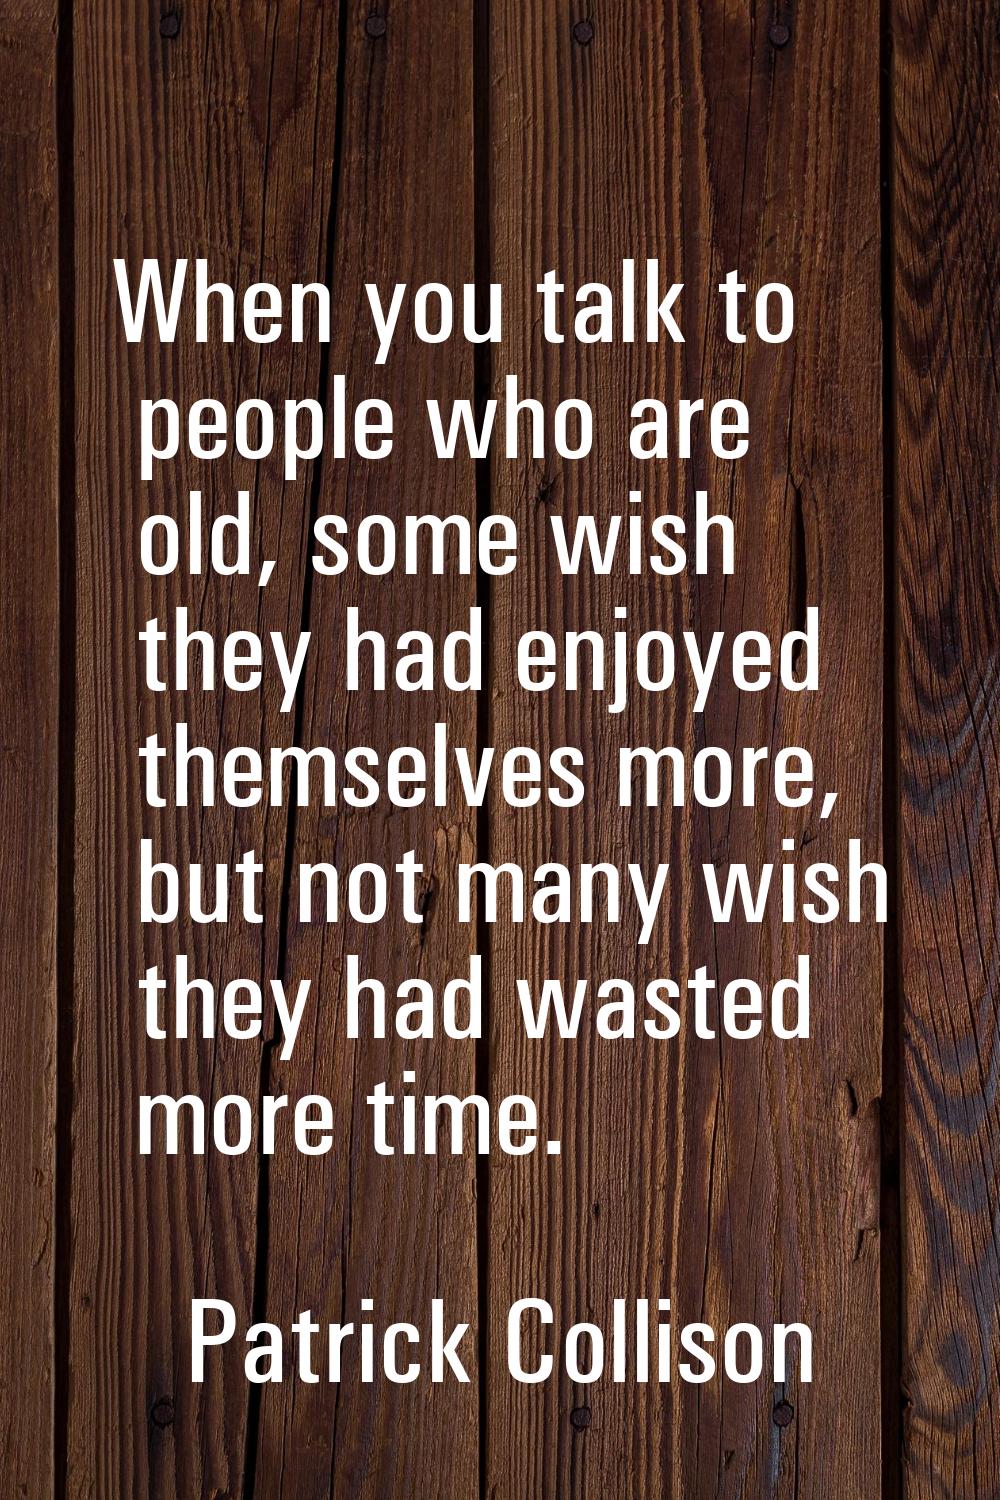 When you talk to people who are old, some wish they had enjoyed themselves more, but not many wish 